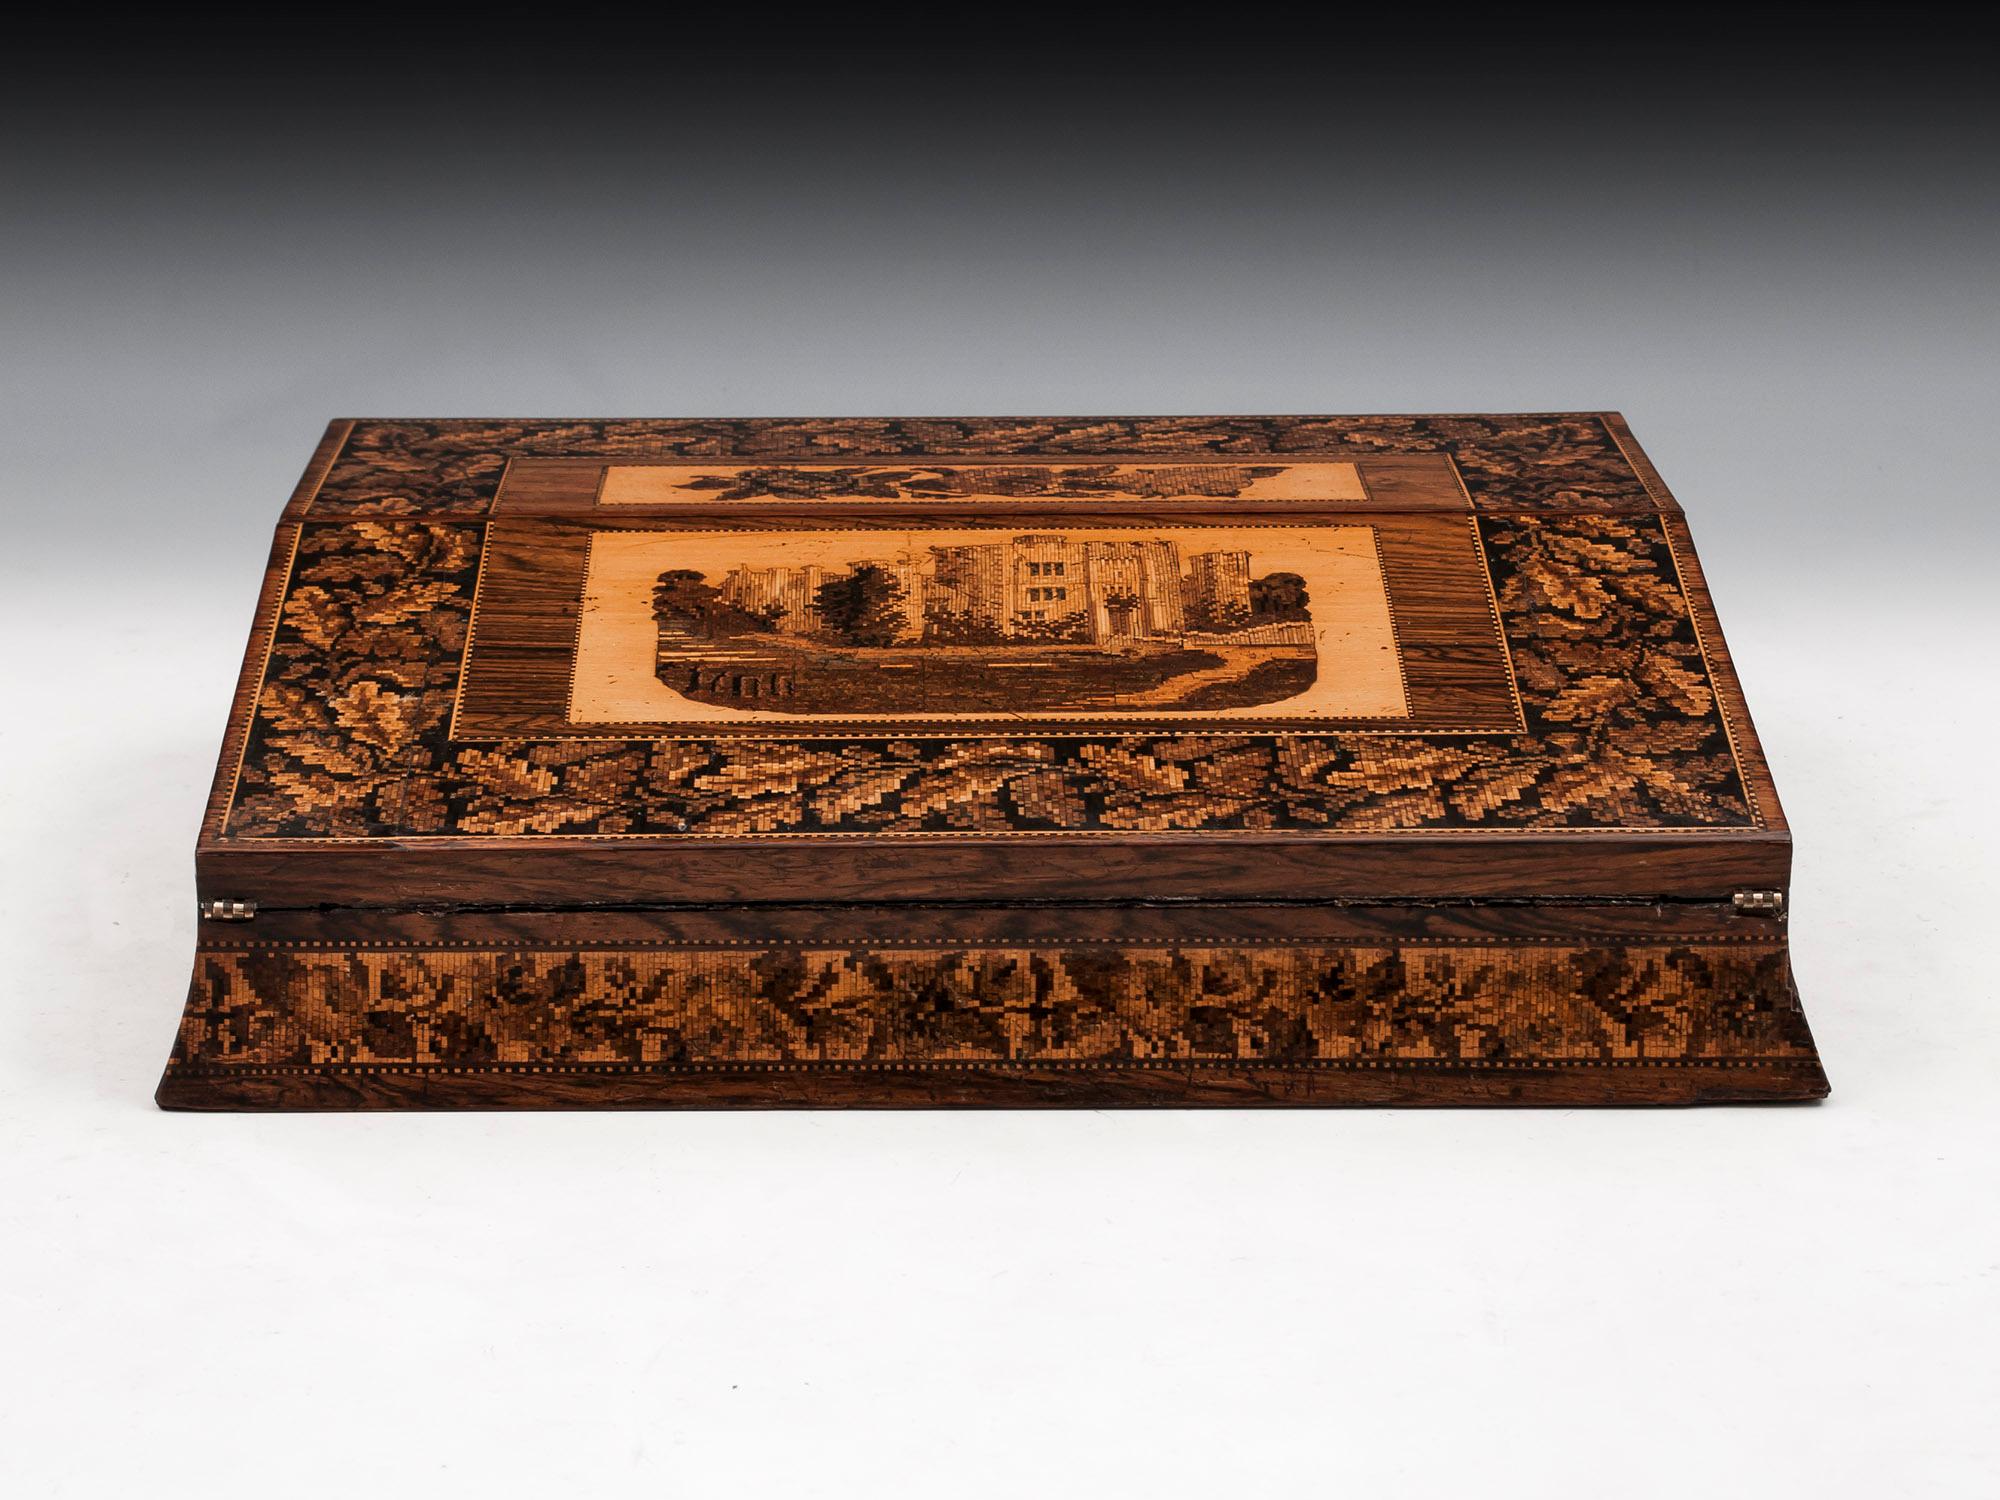 Tunbridge Ware writing box veneered in mahogany, with floral motif and view of Hever Castle, framed with an oak leaf border. Waisted sides. 

The interior of the Tunbridge ware slope is entirely original and comprises a tooled blue velvet writing